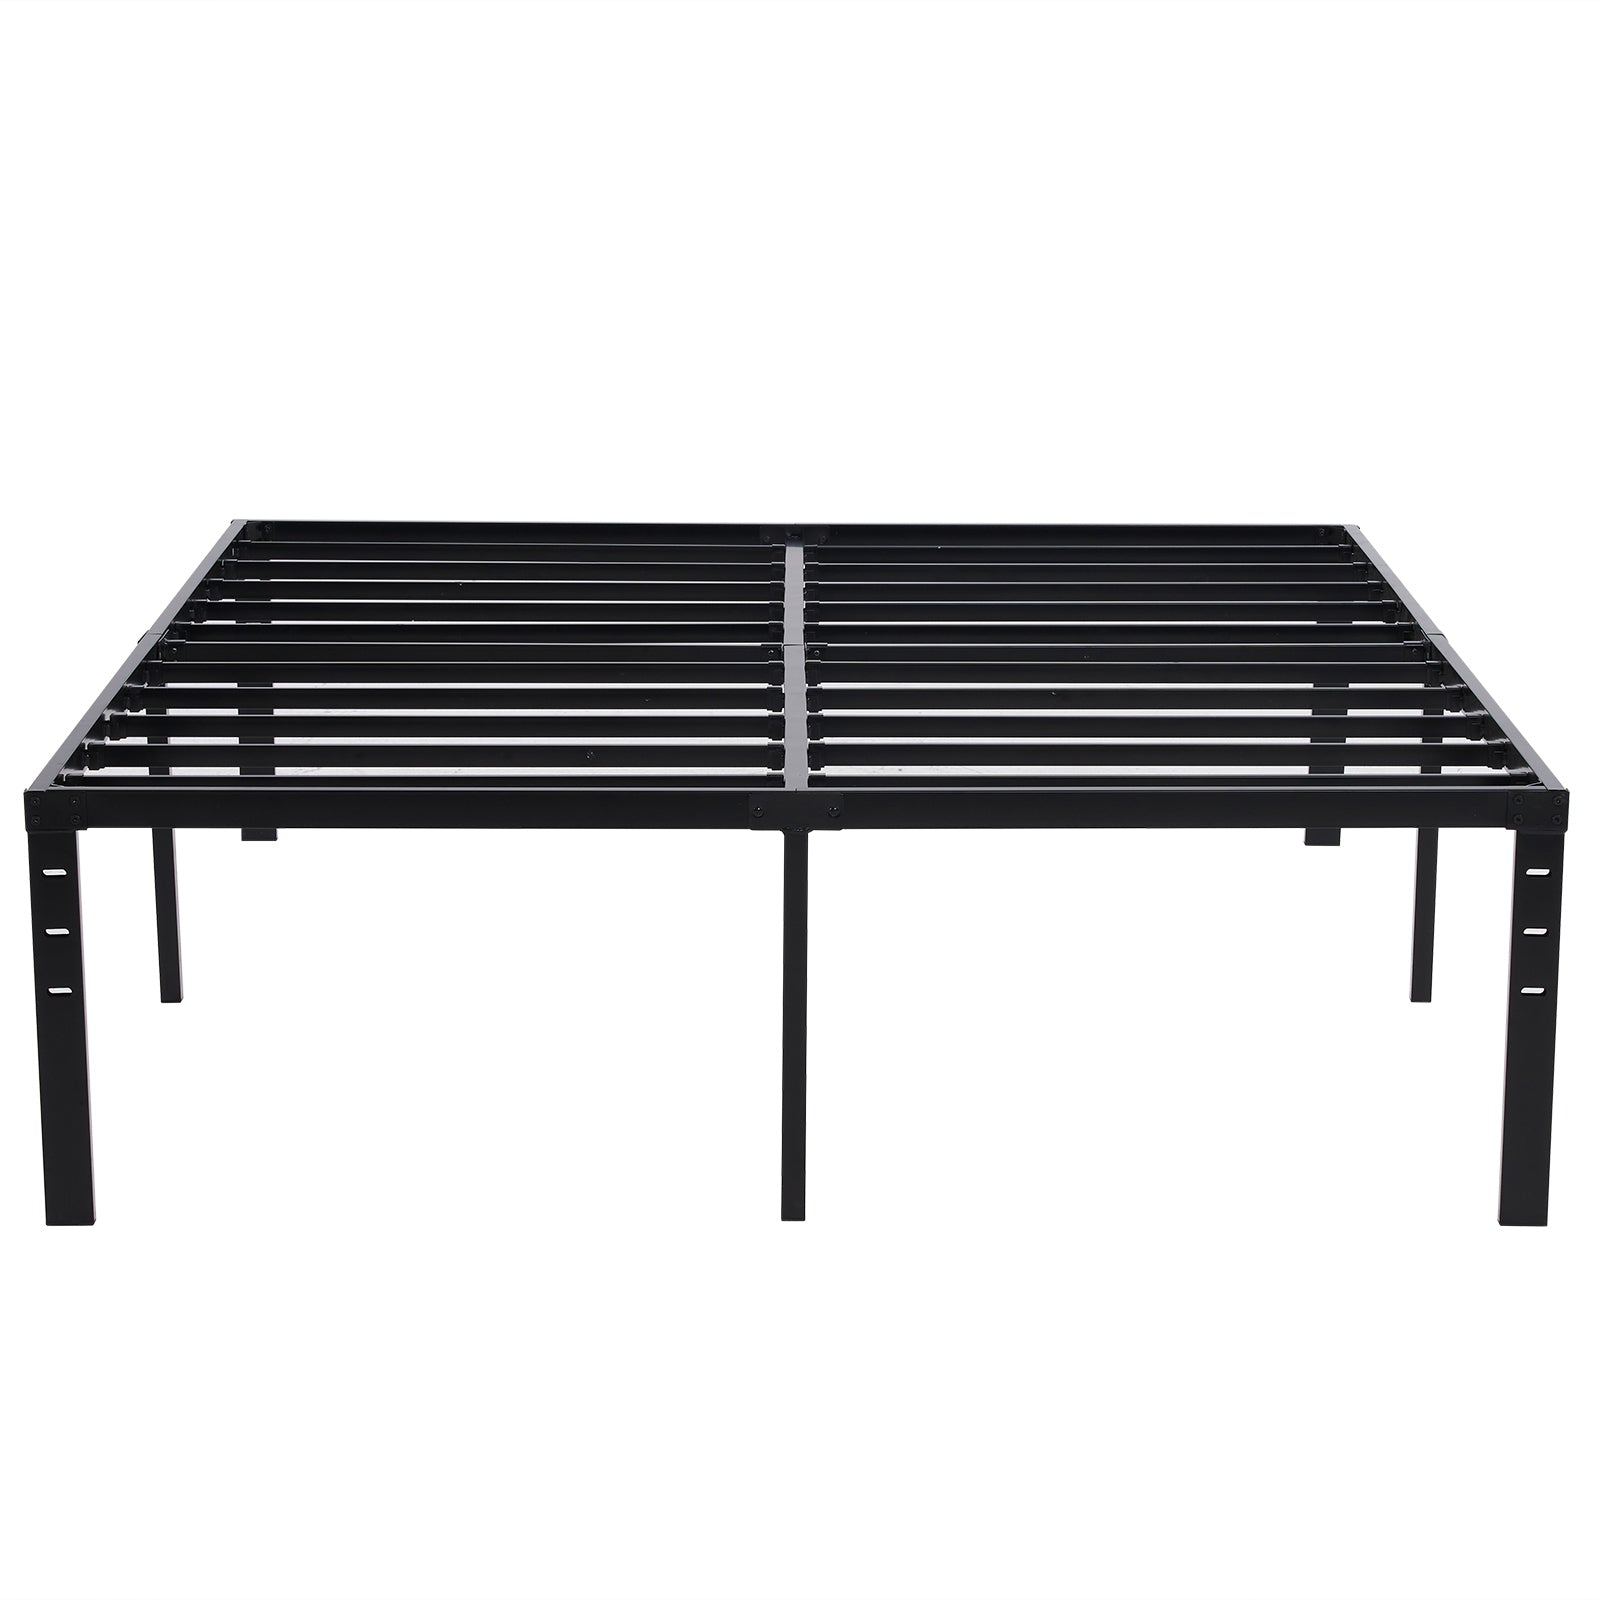 ZNTS 218.5*188*35.5cm Bed Height 14" Simple Basic Iron Bed Frame Iron Bed Black 52496020